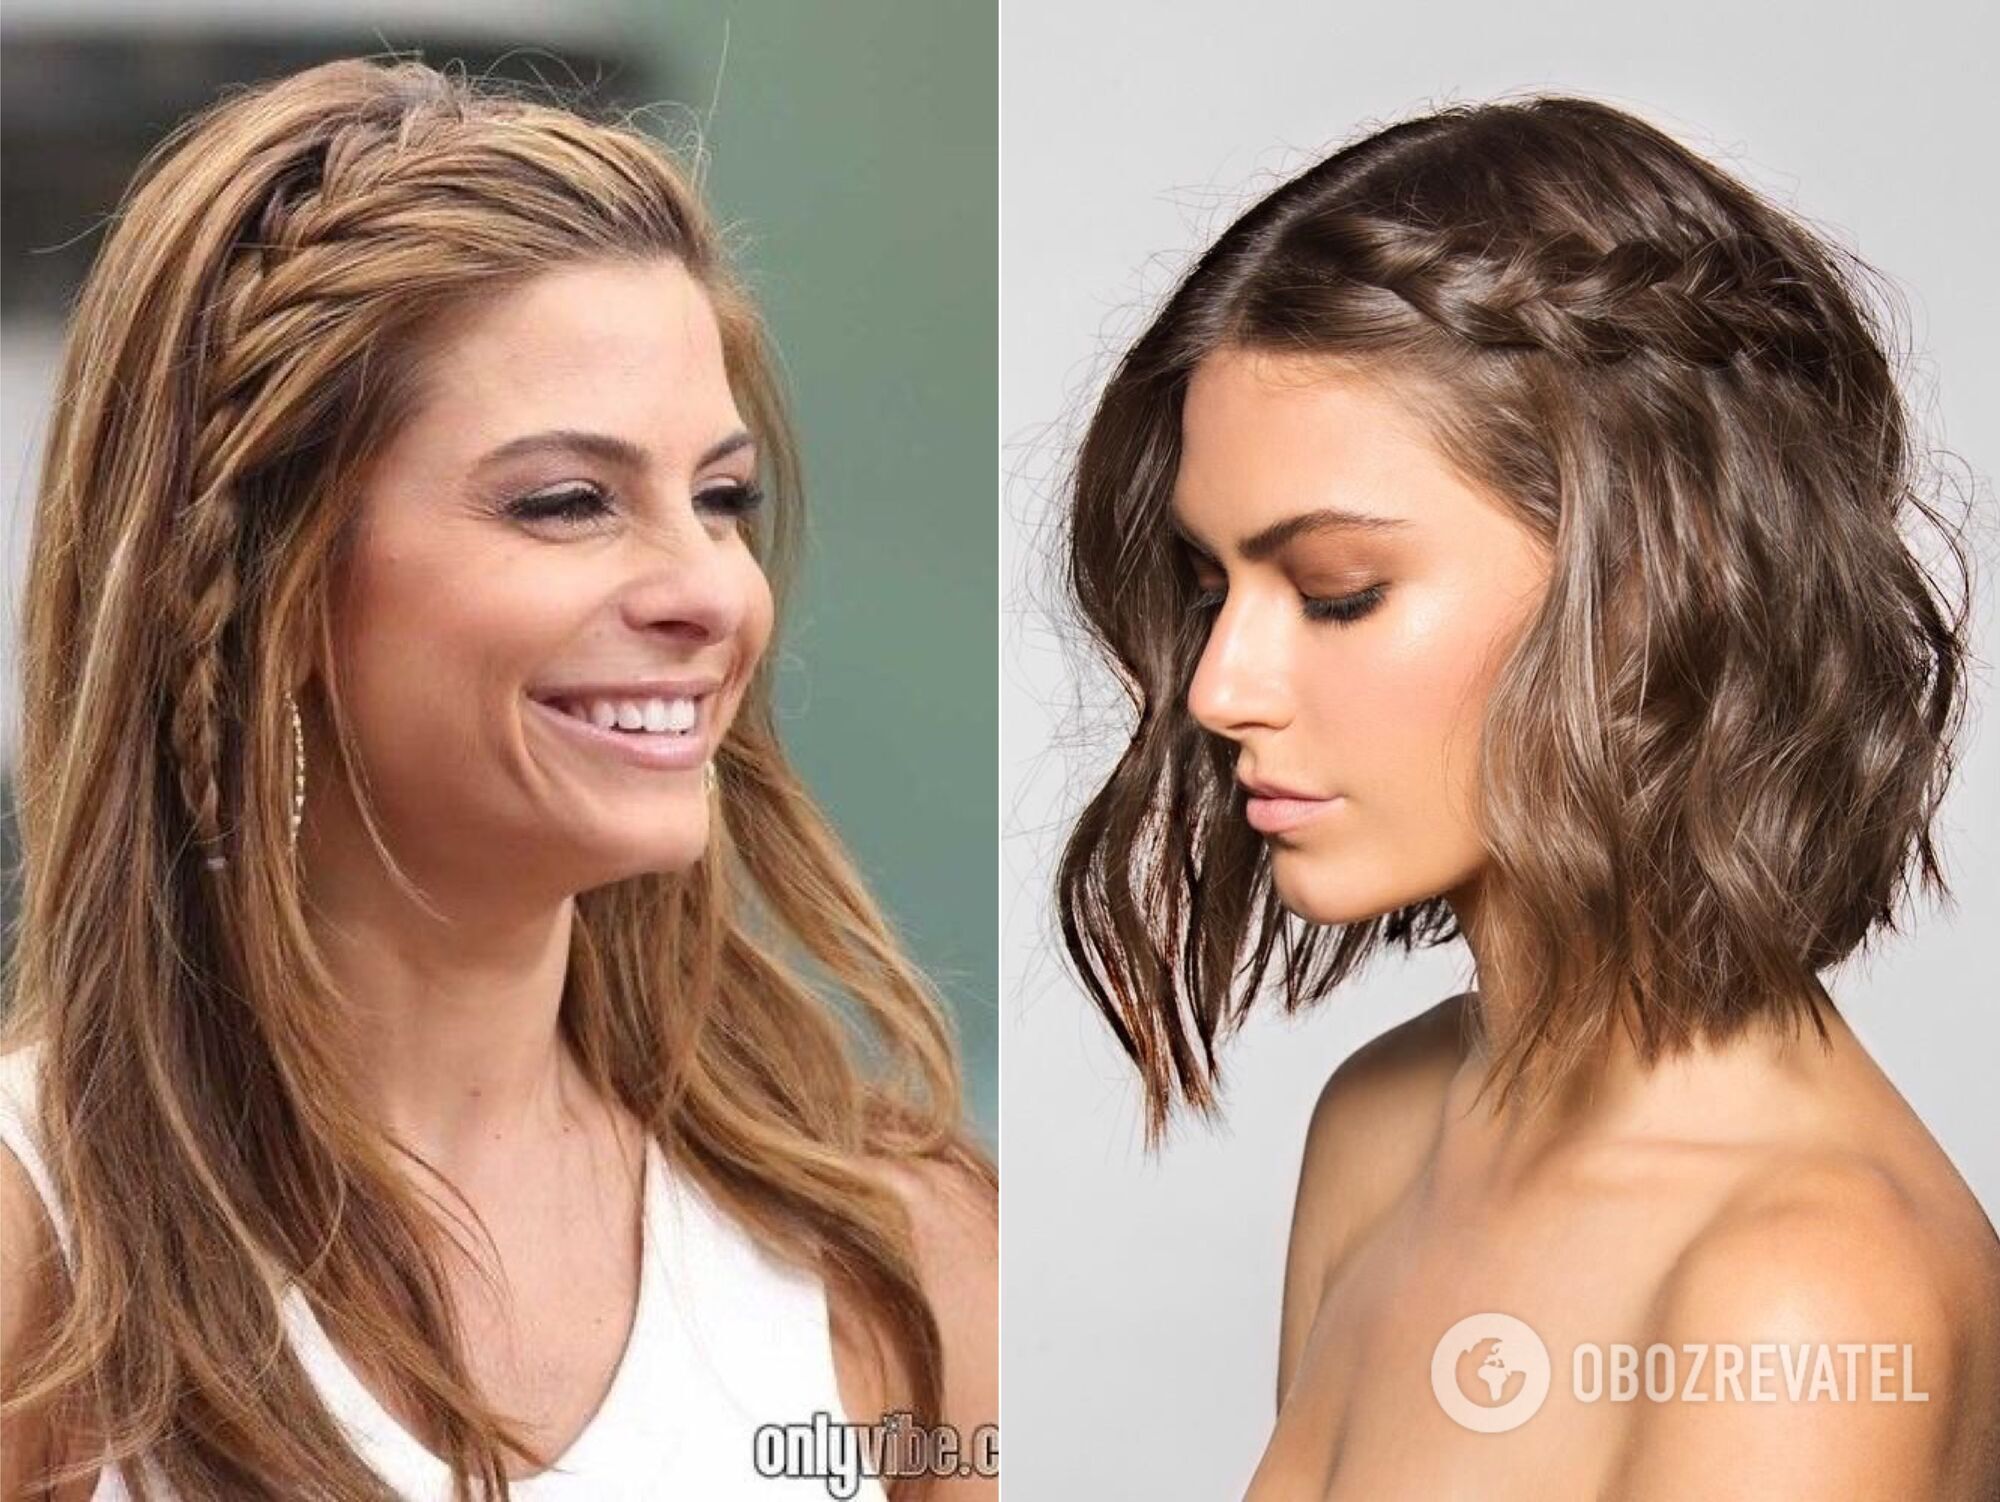 The best hairstyles for short women to make the look exquisite. Photo